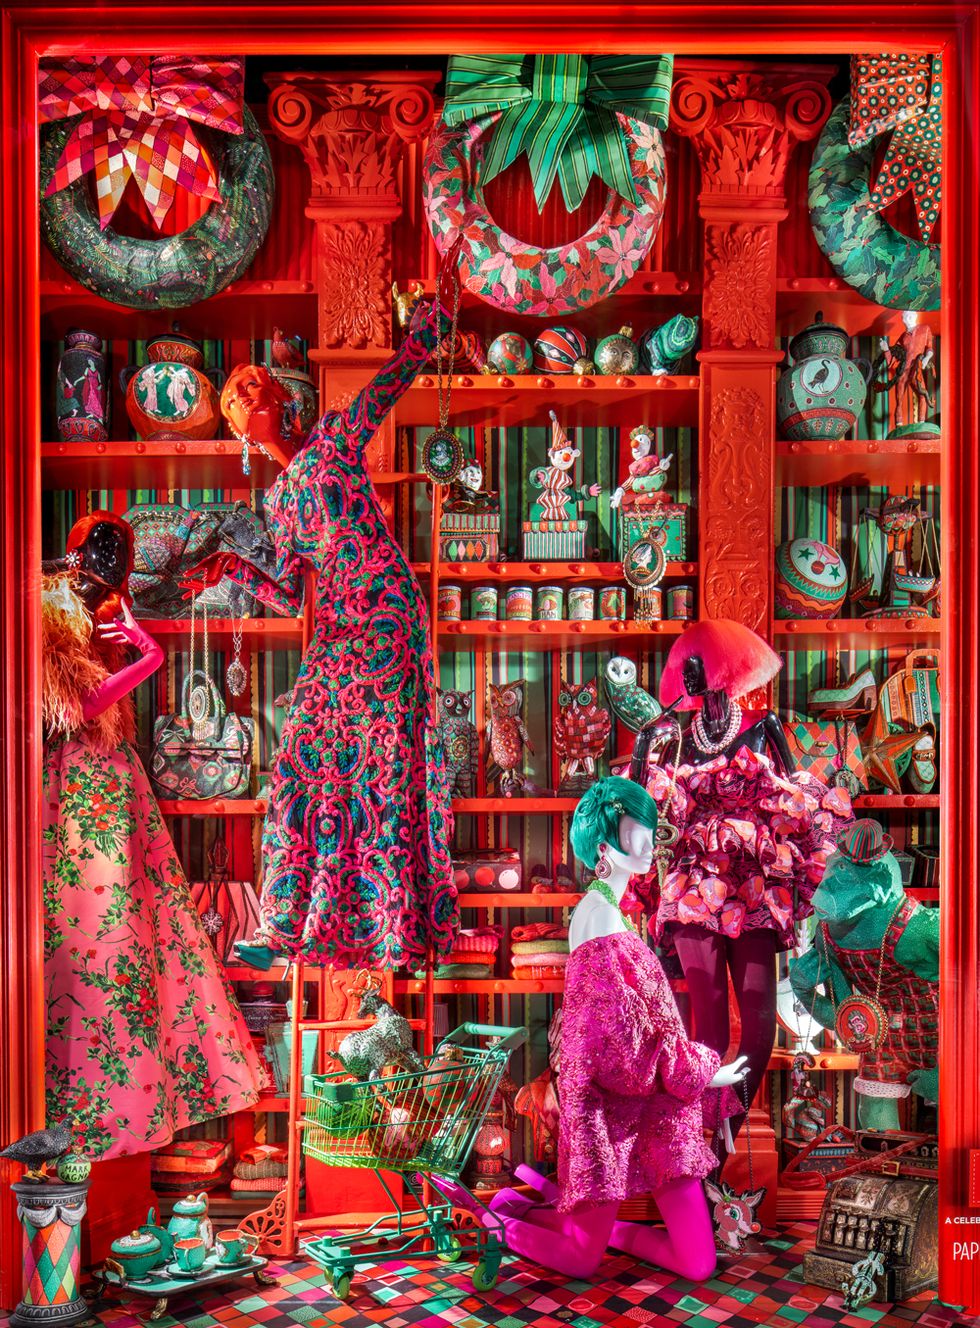 The Best Christmas Window Displays in NYC and Around the World